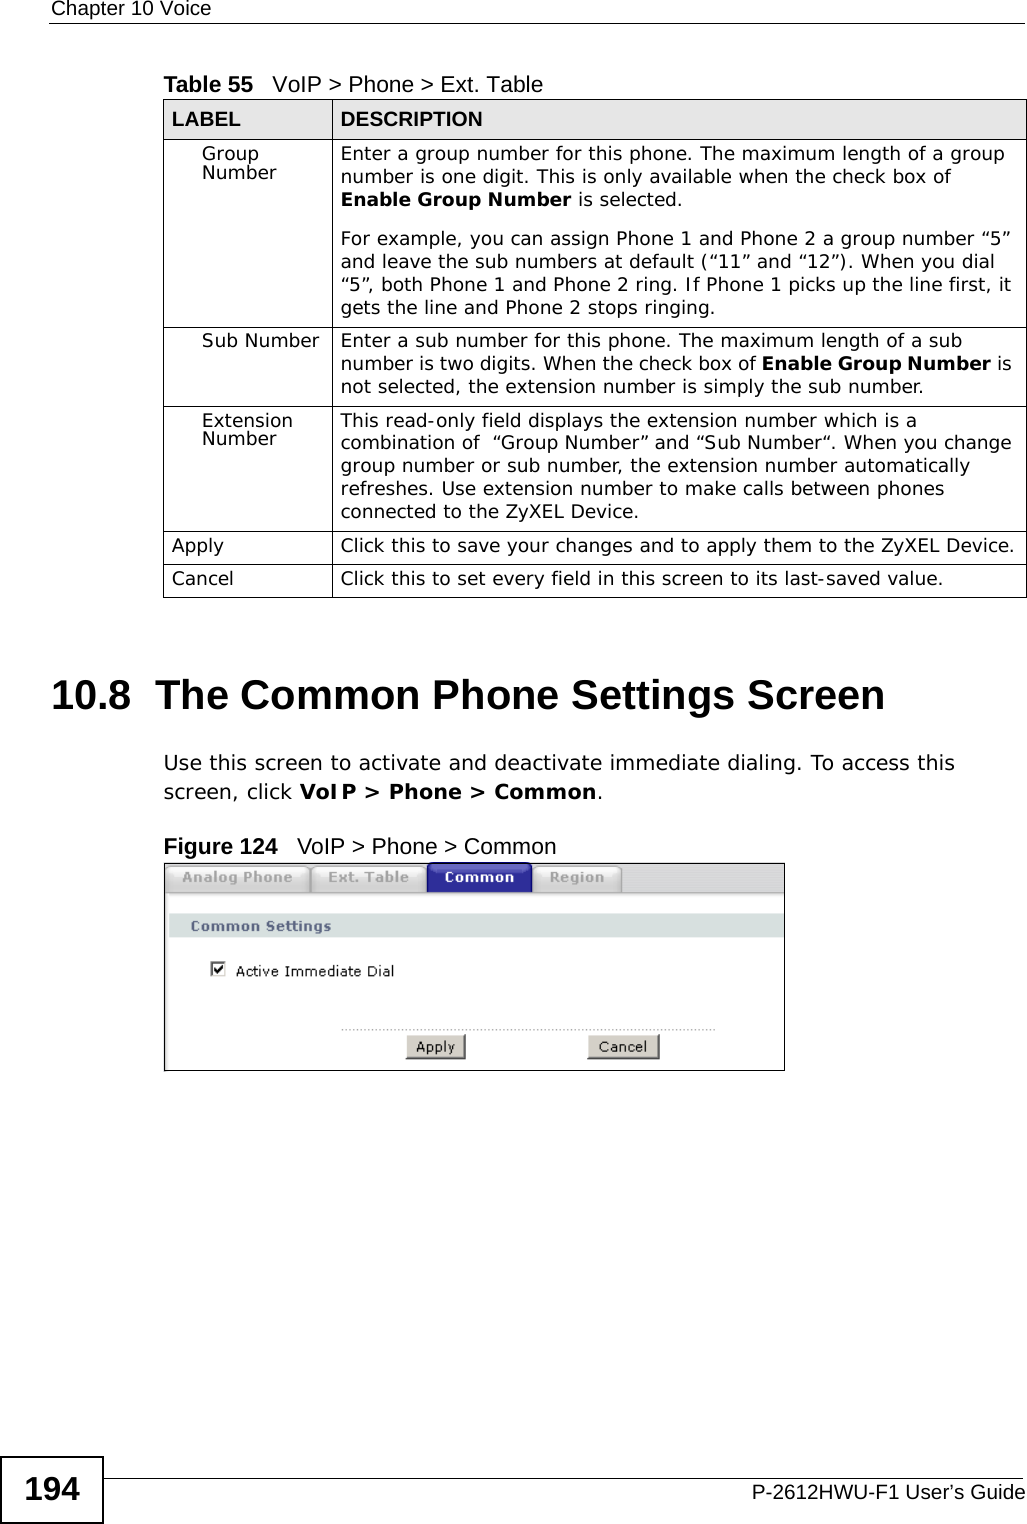 Chapter 10 VoiceP-2612HWU-F1 User’s Guide19410.8  The Common Phone Settings Screen Use this screen to activate and deactivate immediate dialing. To access this screen, click VoIP &gt; Phone &gt; Common.Figure 124   VoIP &gt; Phone &gt; CommonGroup Number Enter a group number for this phone. The maximum length of a group number is one digit. This is only available when the check box of Enable Group Number is selected.For example, you can assign Phone 1 and Phone 2 a group number “5” and leave the sub numbers at default (“11” and “12”). When you dial “5”, both Phone 1 and Phone 2 ring. If Phone 1 picks up the line first, it gets the line and Phone 2 stops ringing.Sub Number Enter a sub number for this phone. The maximum length of a sub number is two digits. When the check box of Enable Group Number is not selected, the extension number is simply the sub number.Extension Number This read-only field displays the extension number which is a combination of  “Group Number” and “Sub Number“. When you change group number or sub number, the extension number automatically refreshes. Use extension number to make calls between phones connected to the ZyXEL Device.Apply Click this to save your changes and to apply them to the ZyXEL Device.Cancel Click this to set every field in this screen to its last-saved value.Table 55   VoIP &gt; Phone &gt; Ext. TableLABEL DESCRIPTION